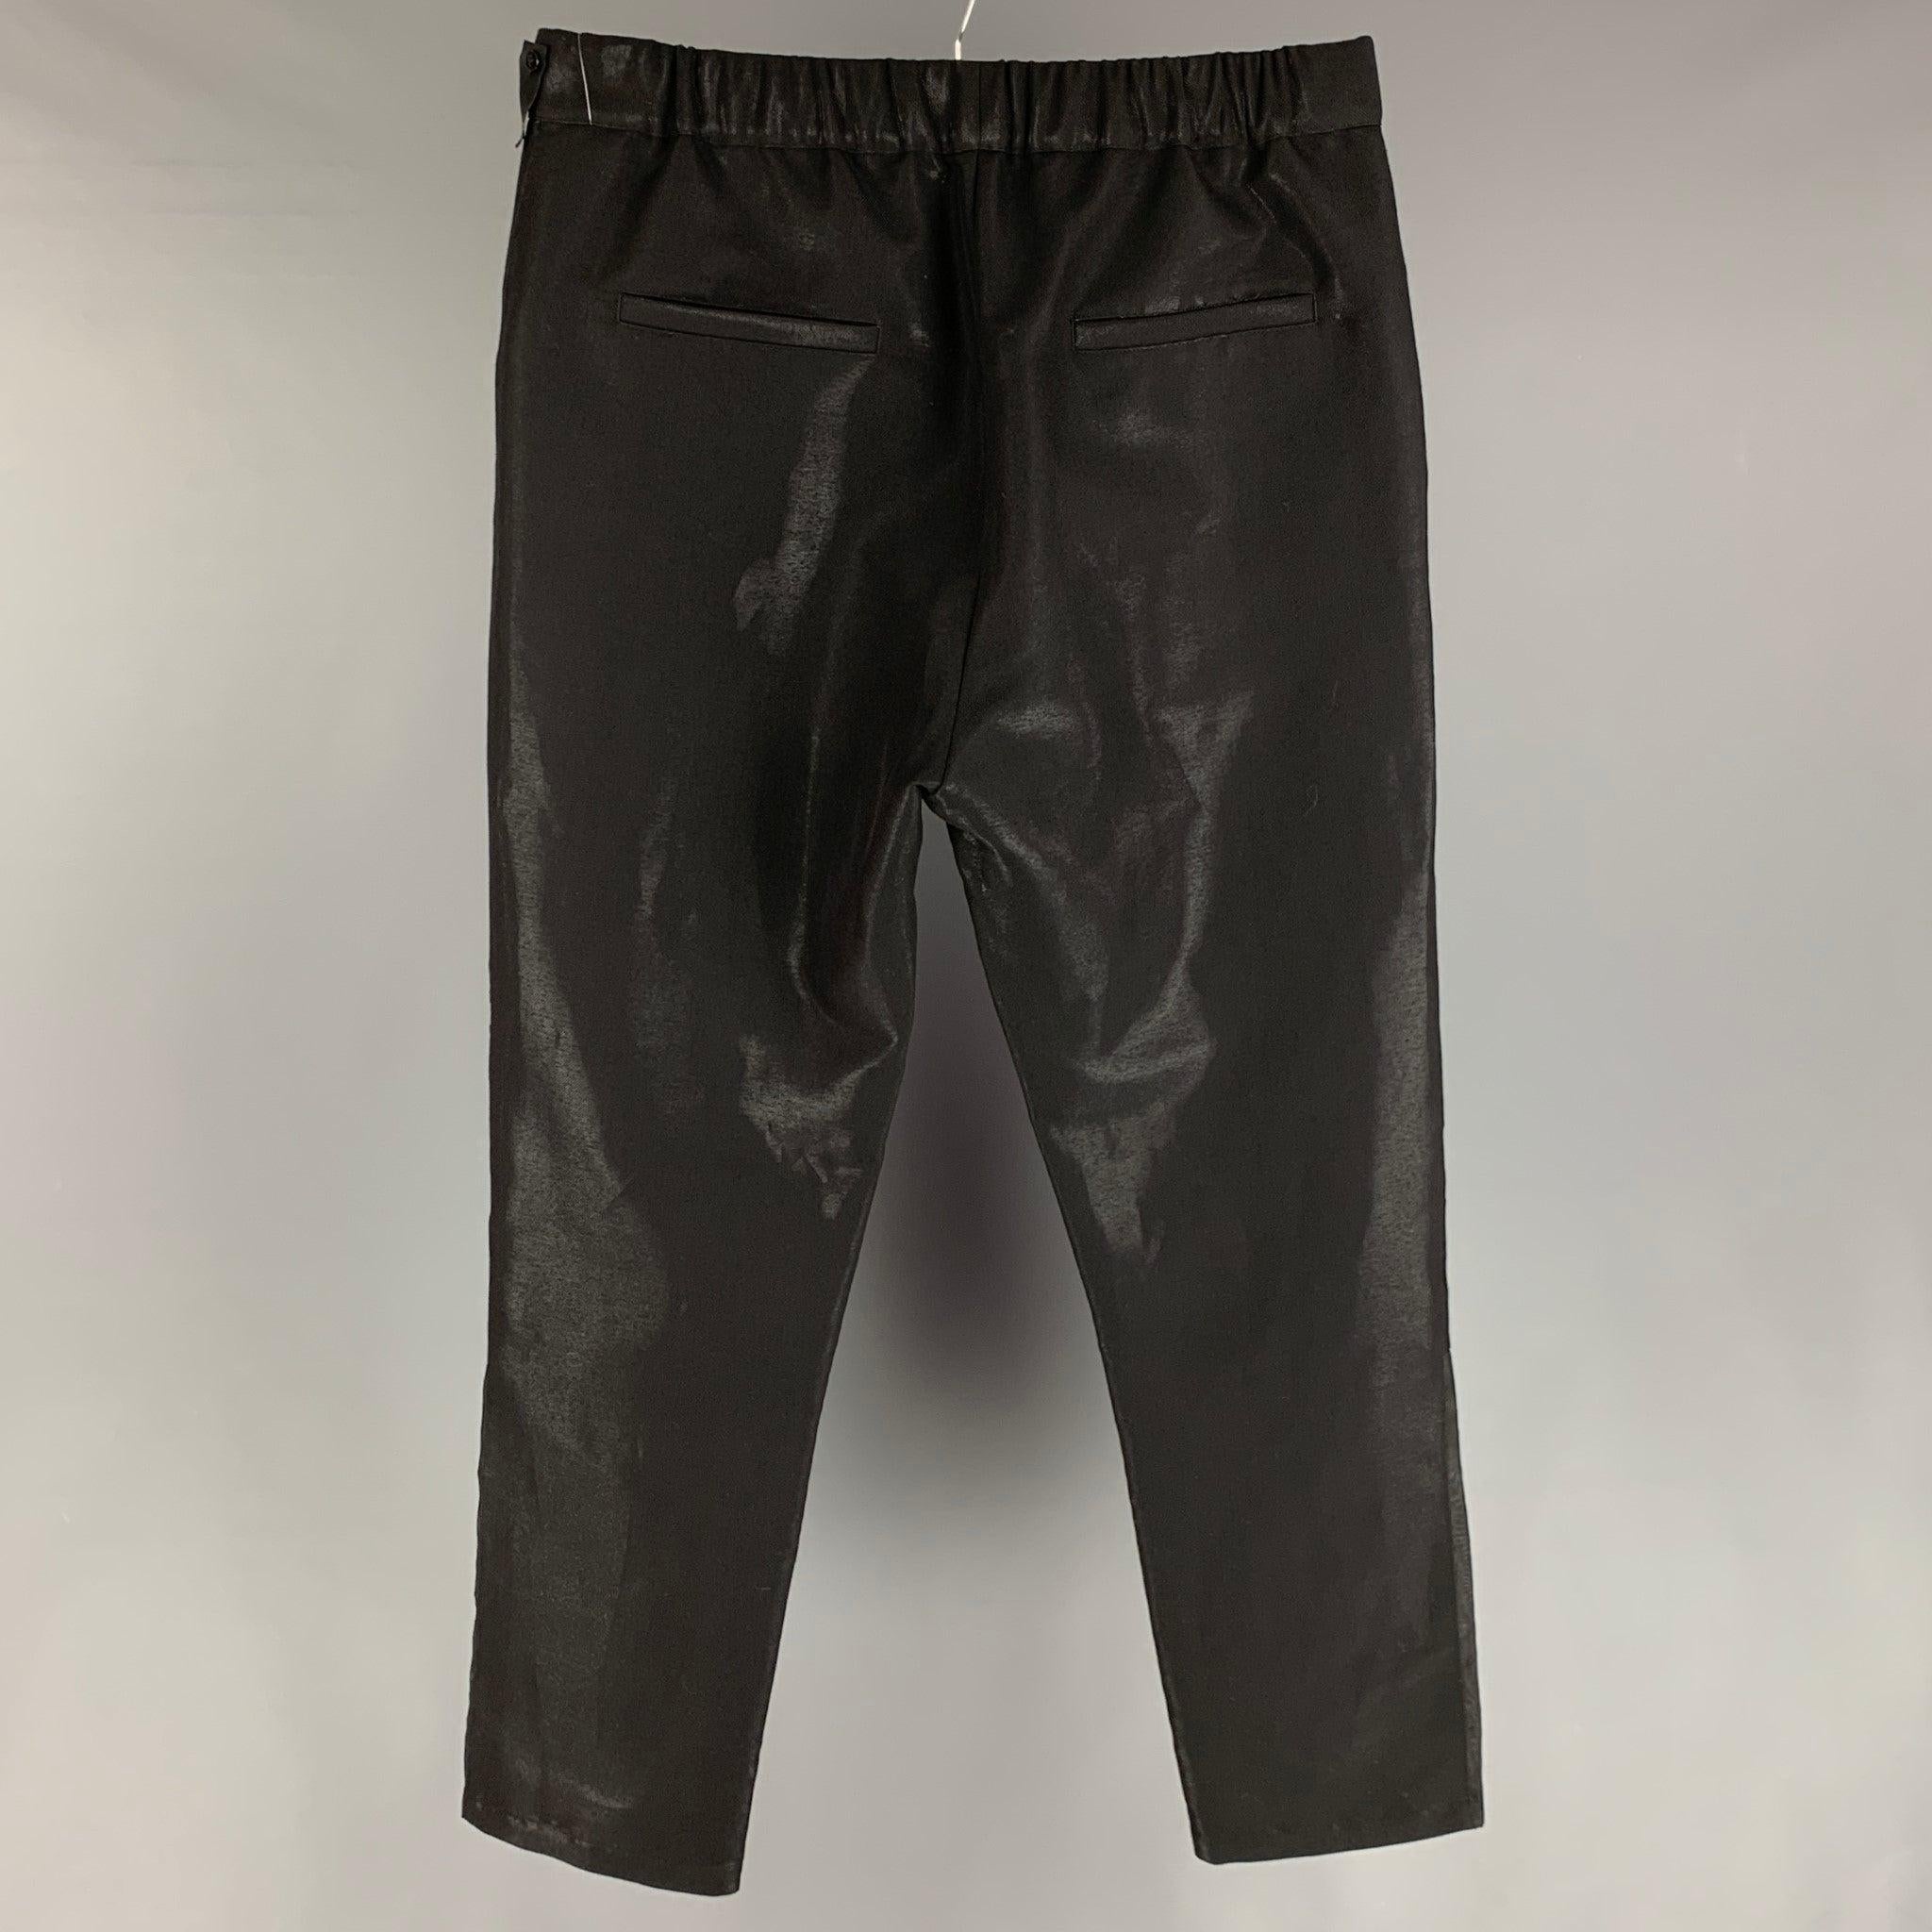 FENDI pants comes in a black virgin wool / polyester featuring a cargo style, sheer patch pockets, drawstring, elastic waistband, and a zip fly closure. Made in Italy.
Excellent
Pre-Owned Condition. 

Marked:   5 

Measurements: 
  Waist: 34 inches 